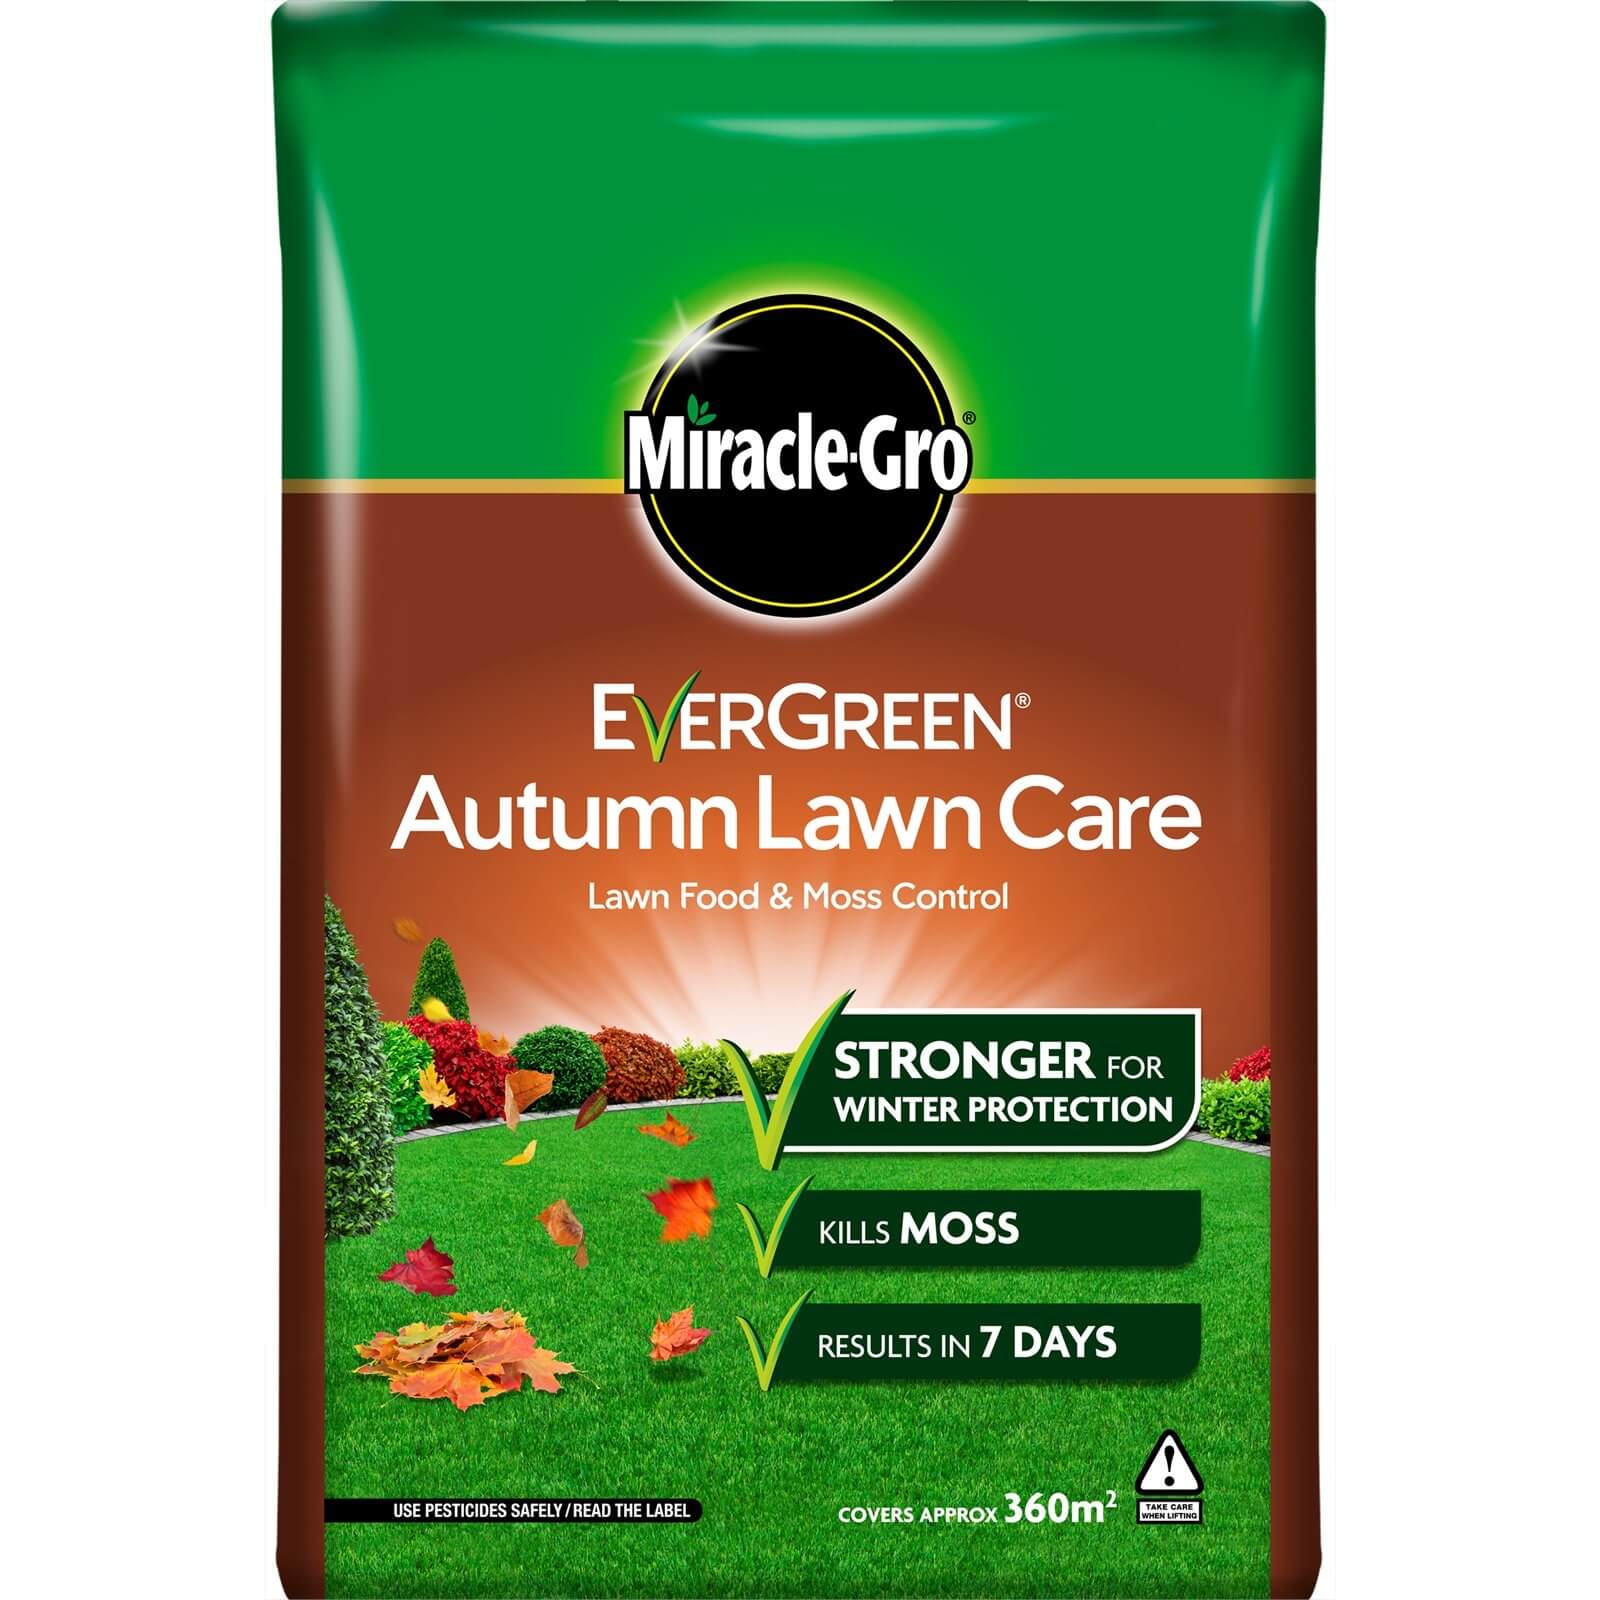 Miracle-Gro EverGreen Autumn Lawn Care - 360m²